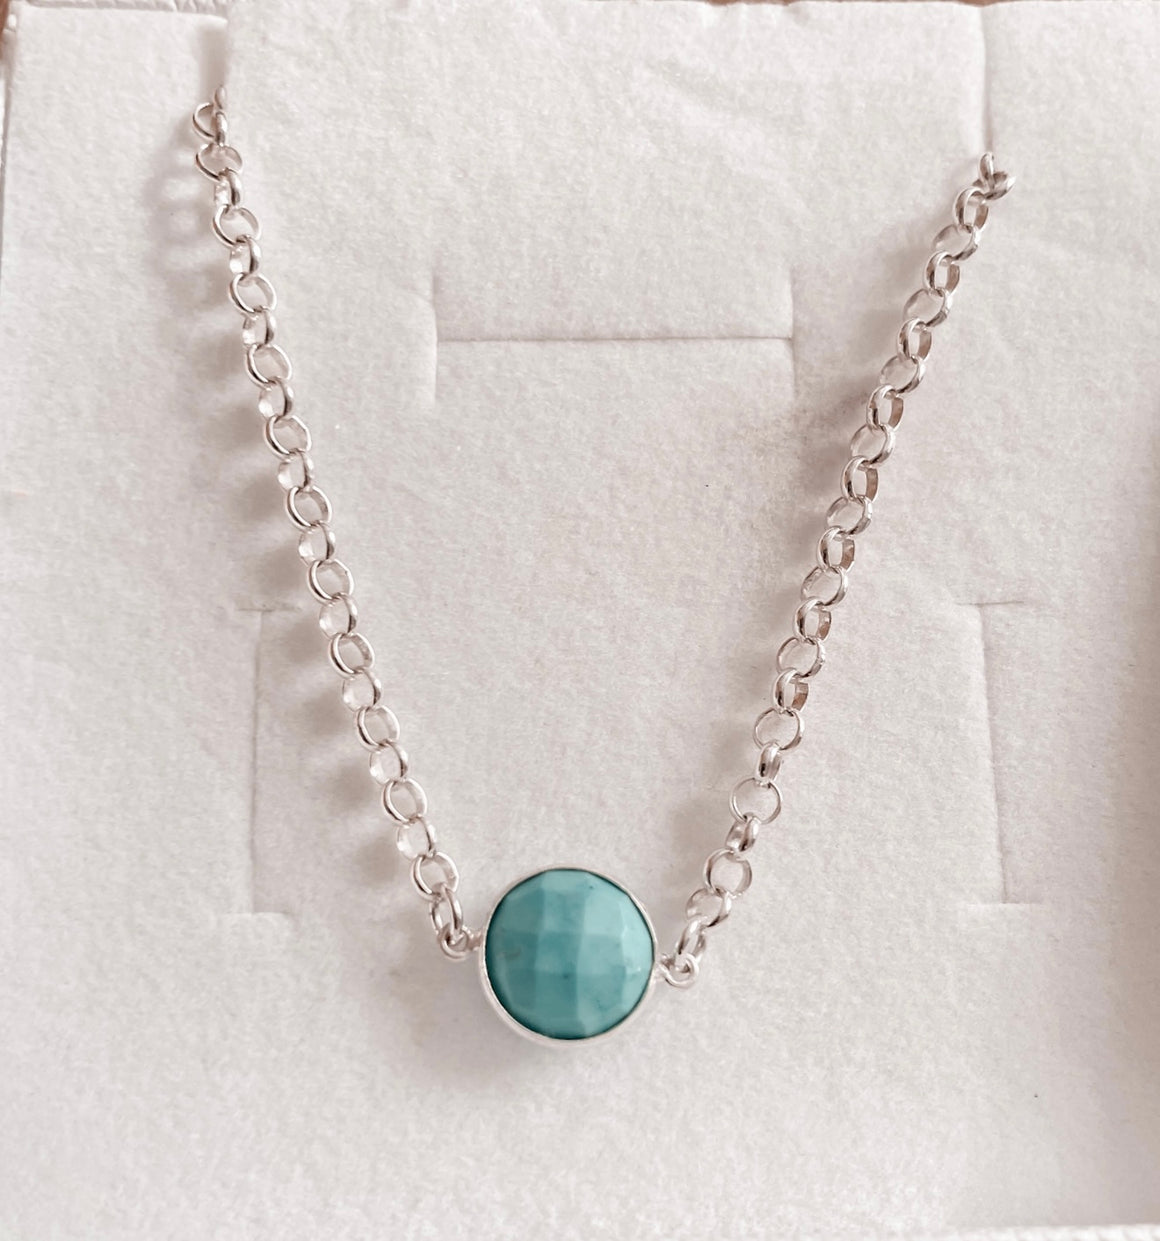 Silver necklace with turquoise Hewlite stone pendant